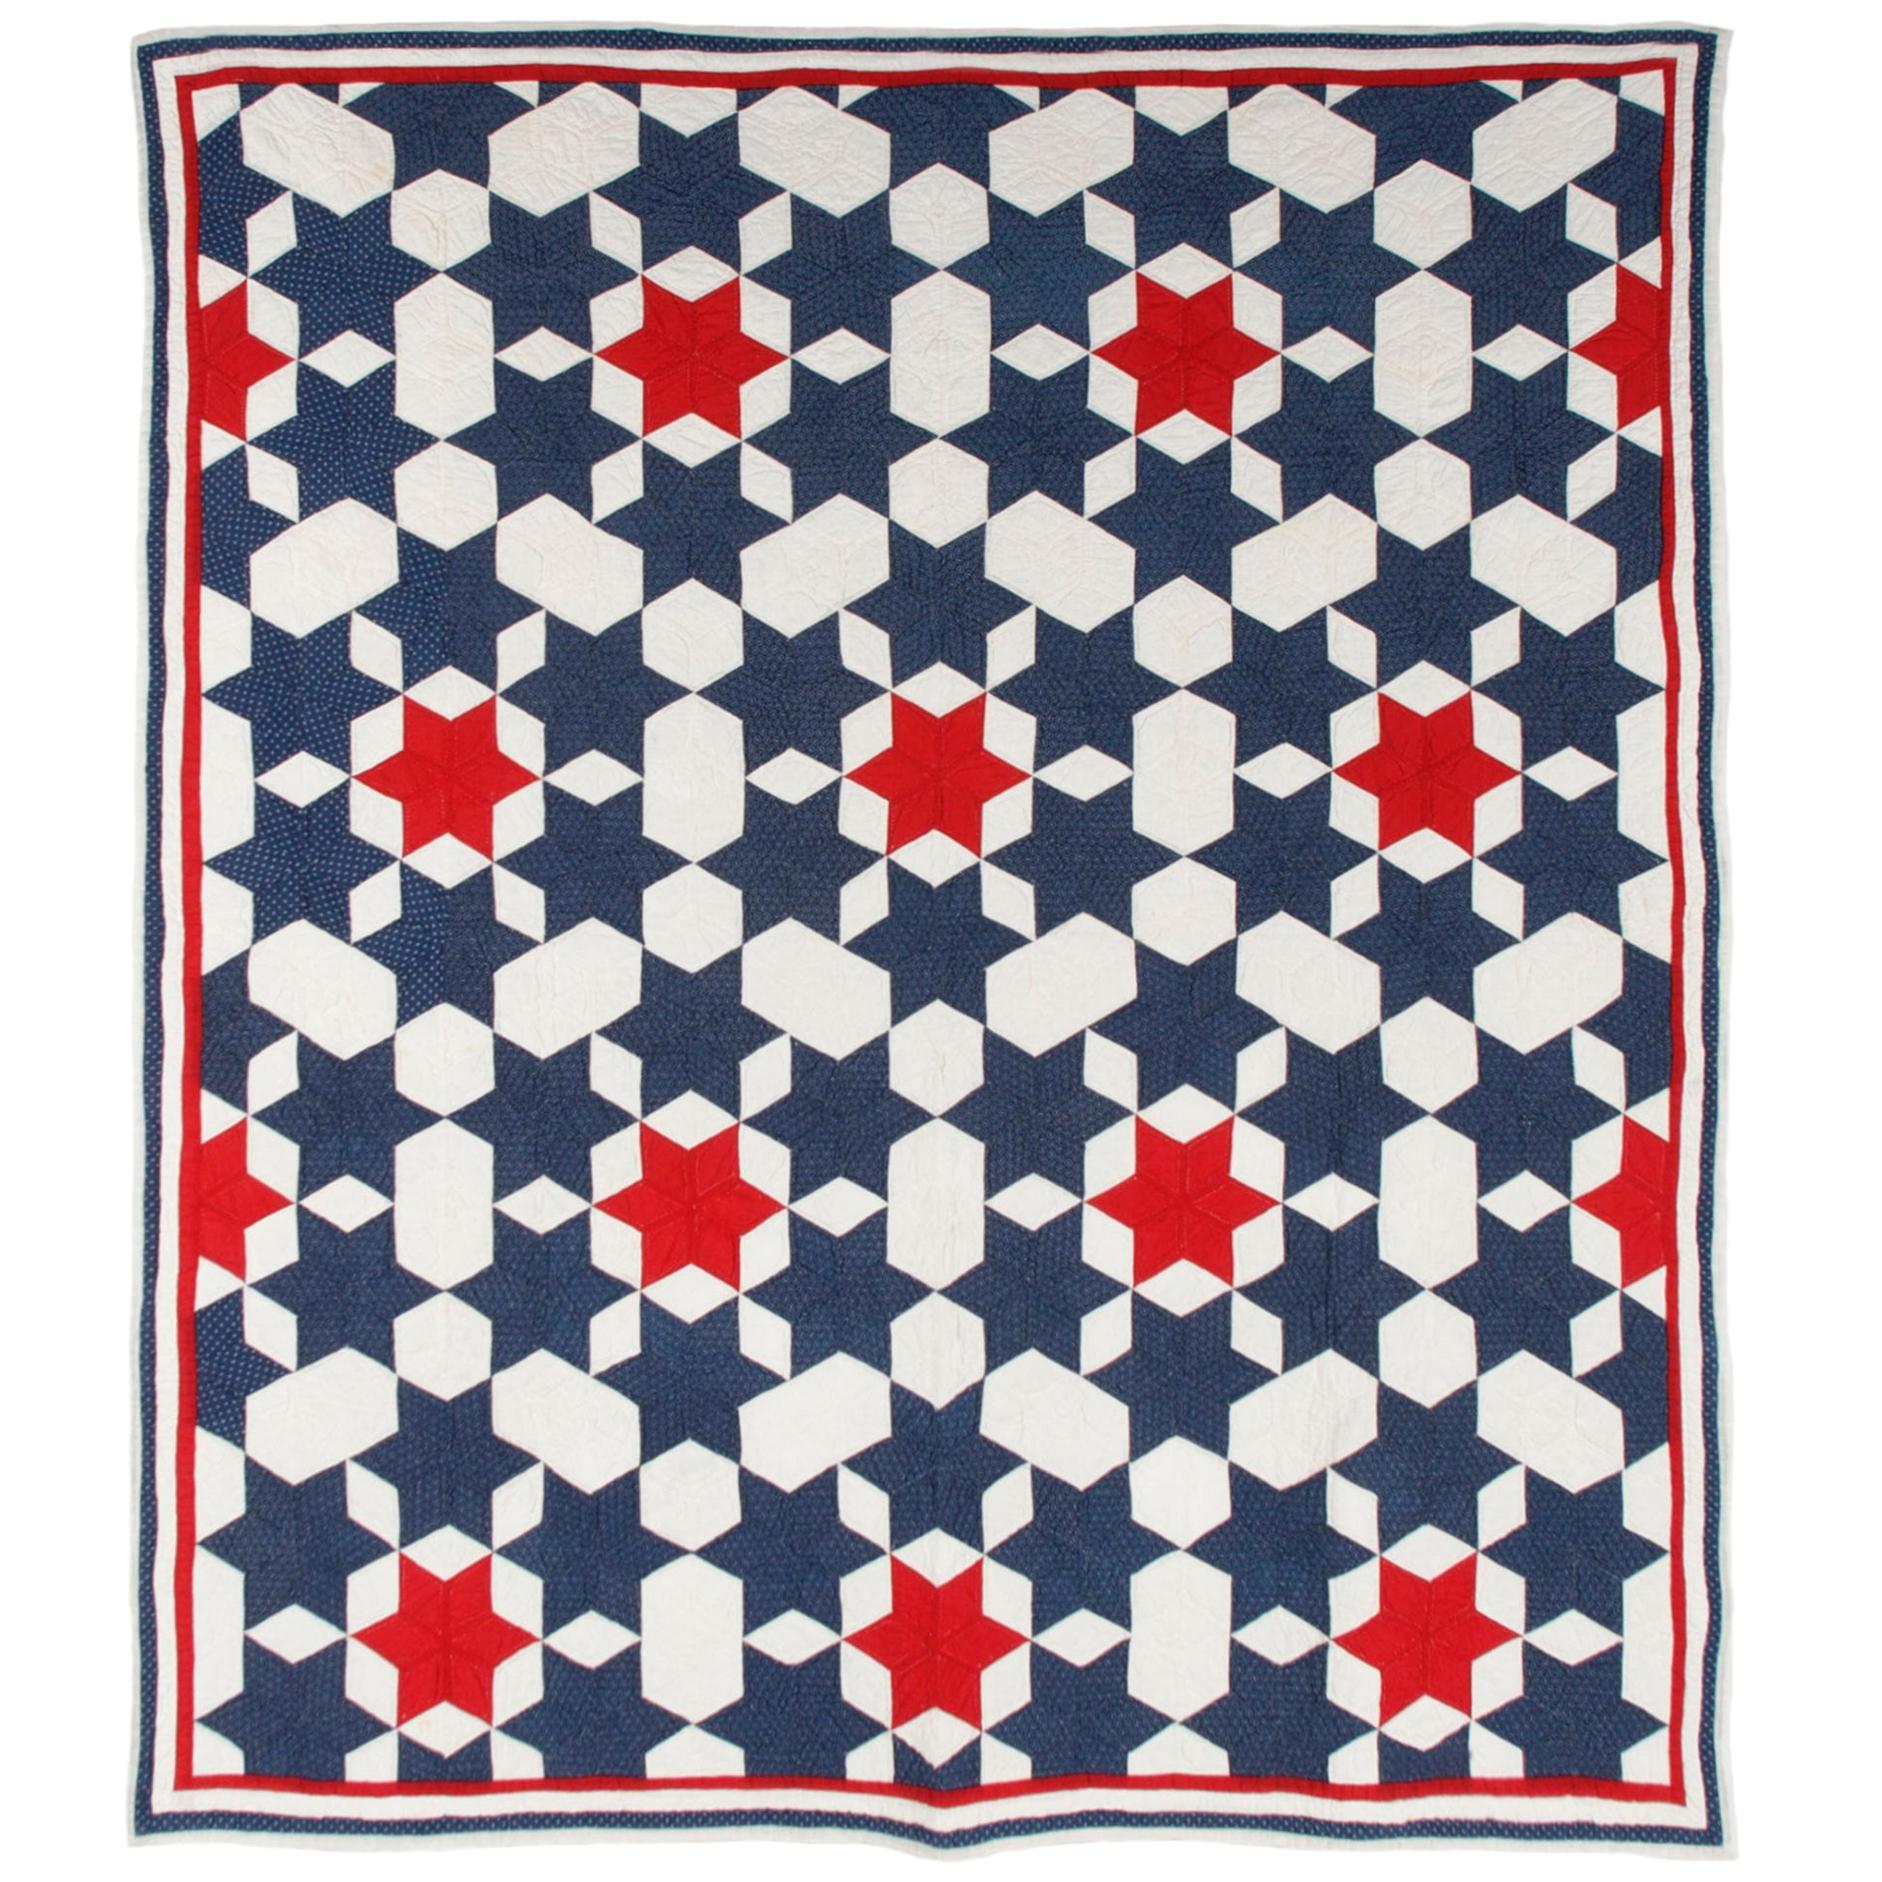 Red, White, & Blue Calico "Seven Sisters" Patriotic Star Quilt, circa 1890-1910